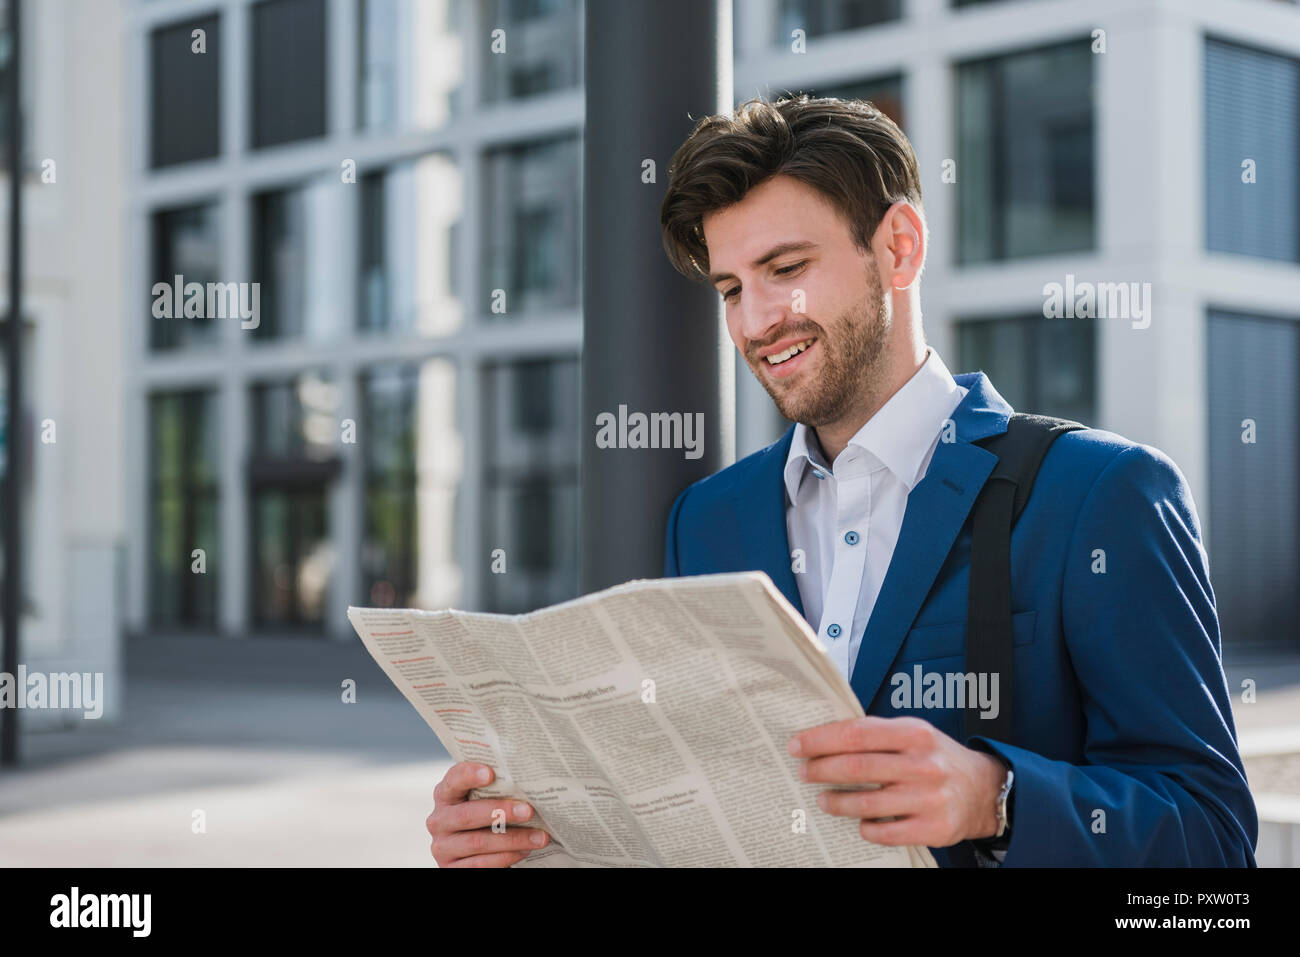 Smiling businessman reading newspaper in the city Stock Photo